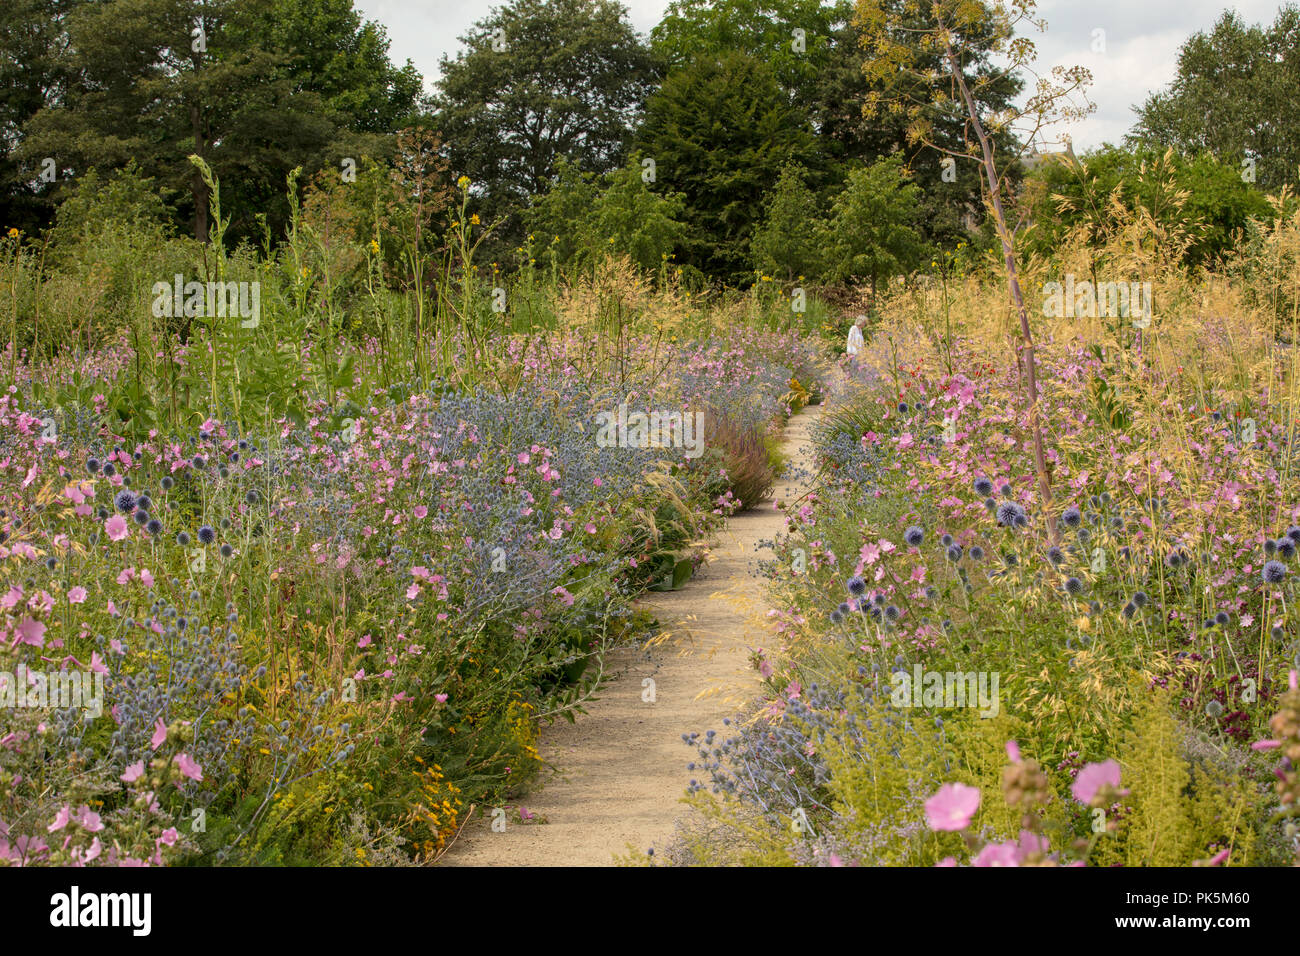 Merton Borders, Oxford Botanic Garden, scientifically designed visually stunning wildflower display. Ecologically sustainable plants grown from seeds. Stock Photo